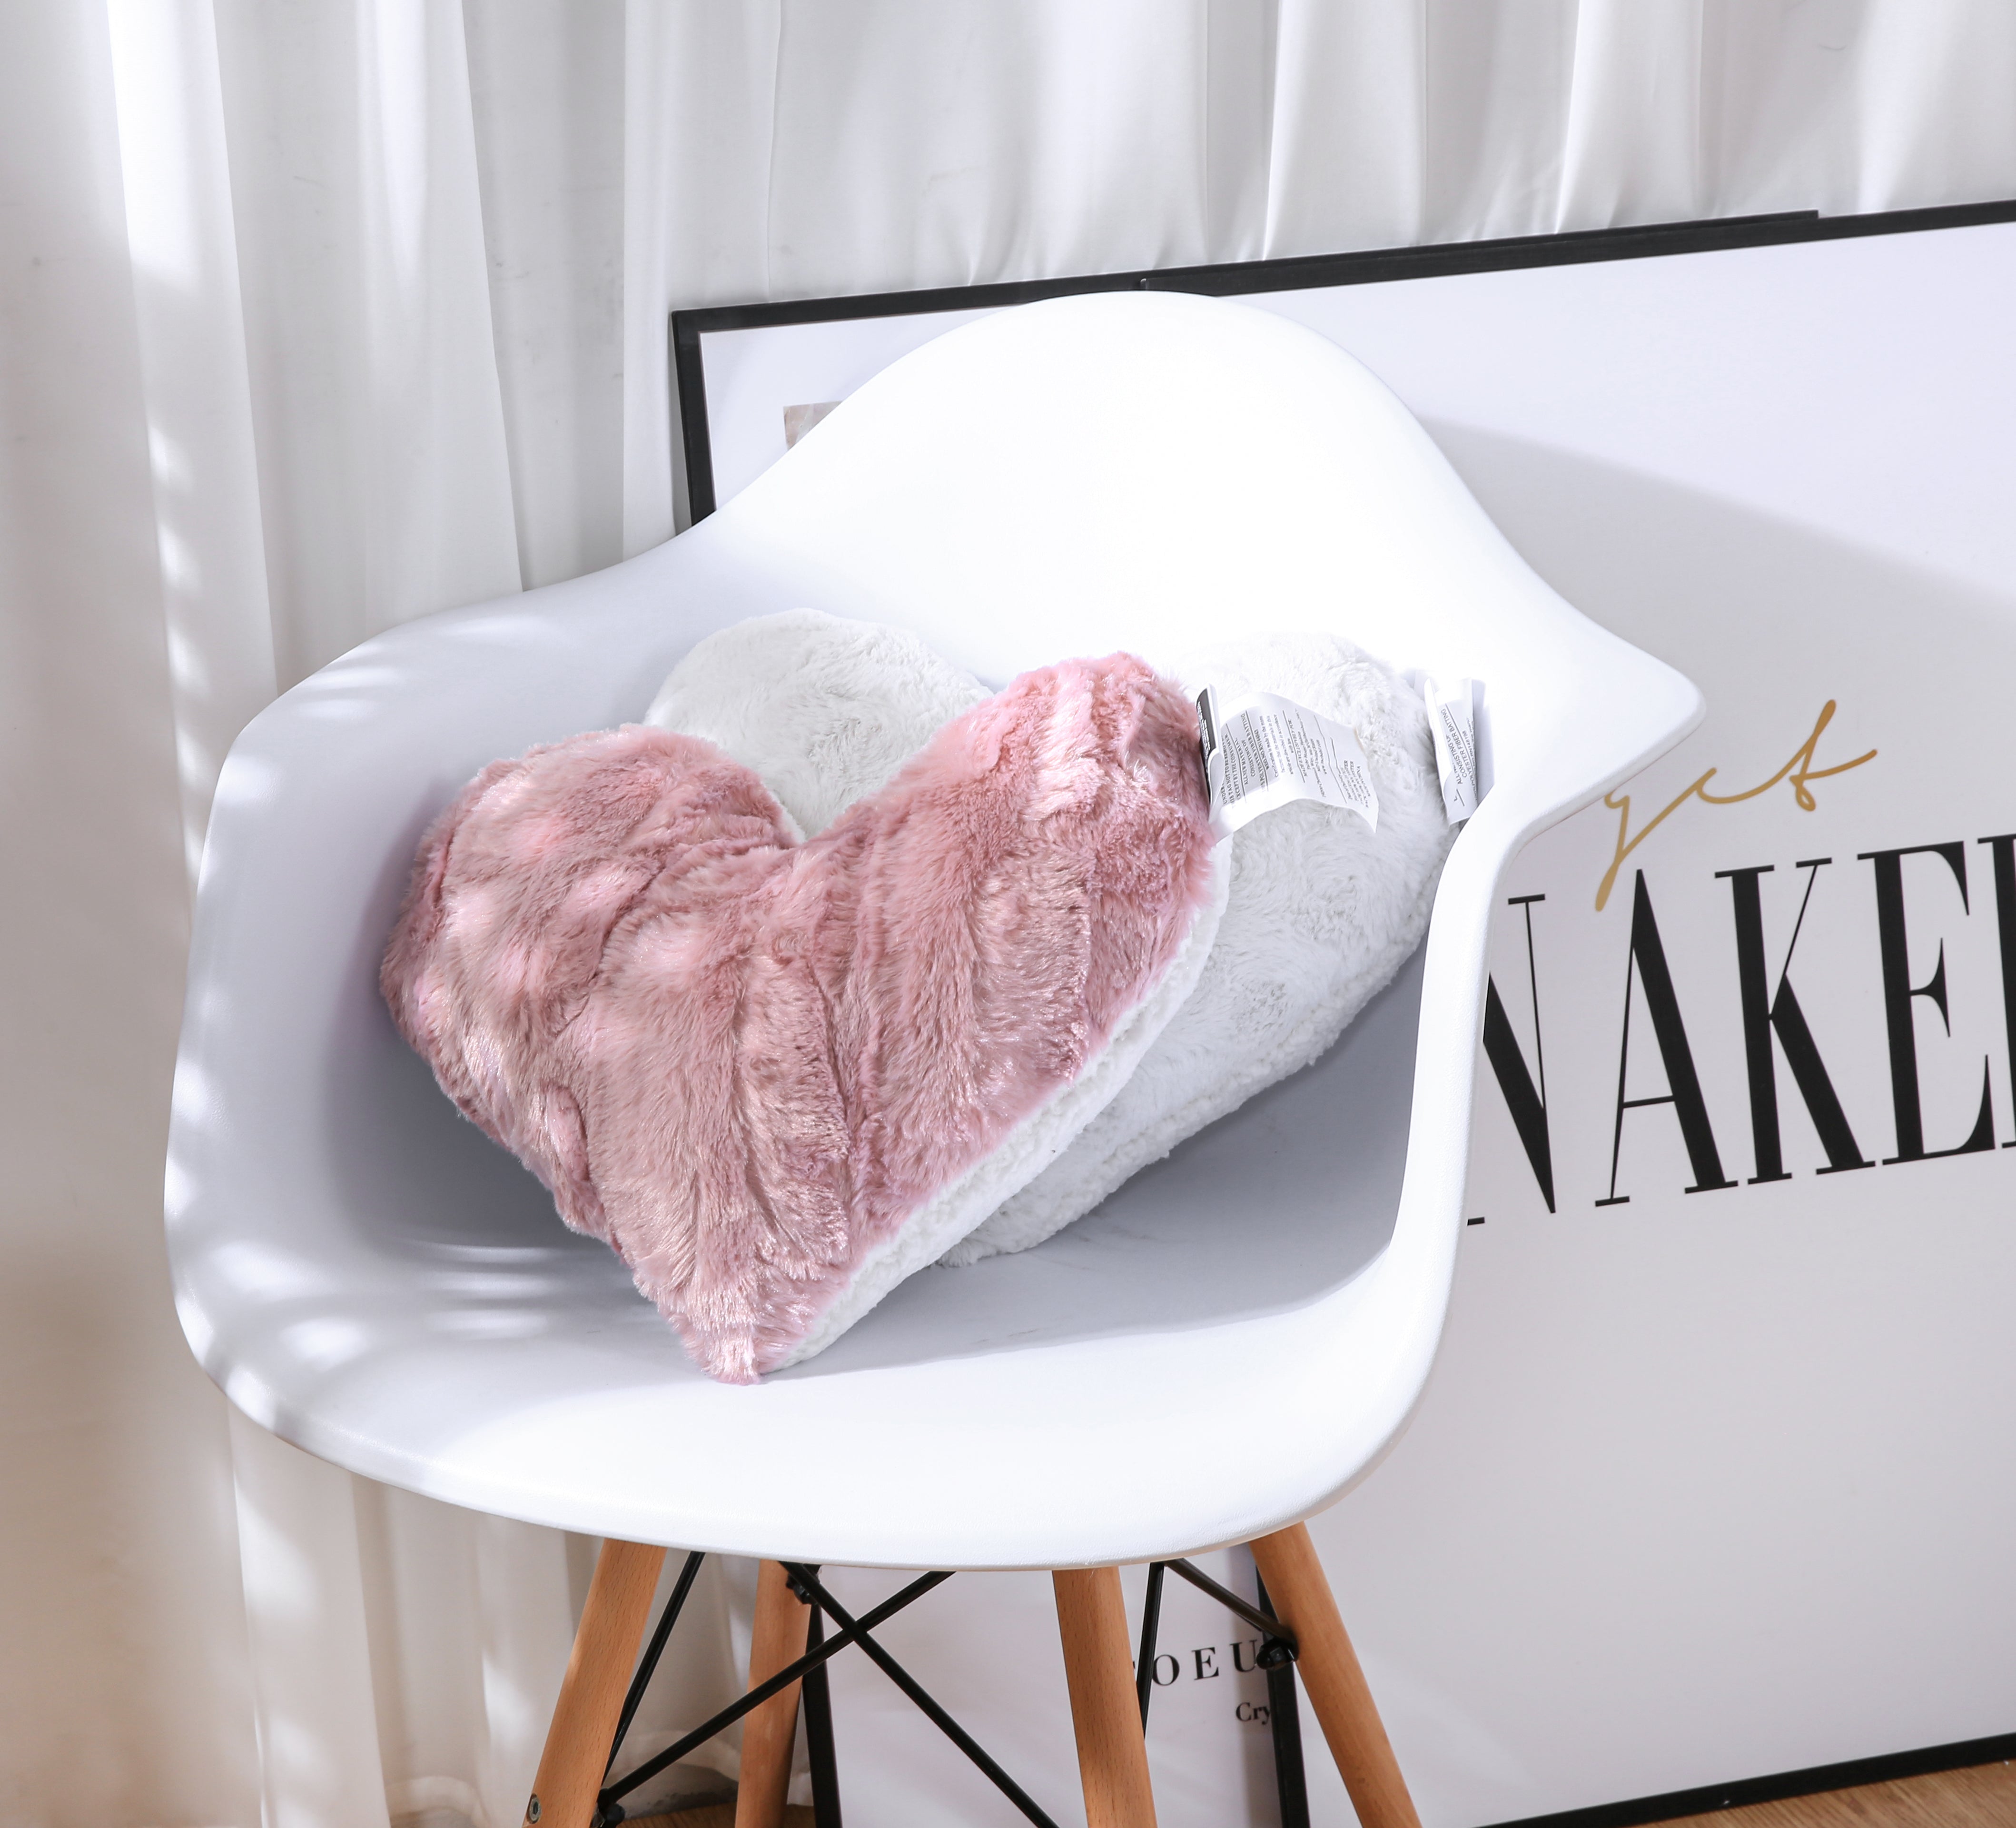 A close-up view of two plush faux fur heart-shaped pillows nestled on a white armchair. The pillows are soft and textured, resembling faux fur. One is a pale blush dusty rose pink color, while the other is white. They rest on a white armchair with a simple, modern design.